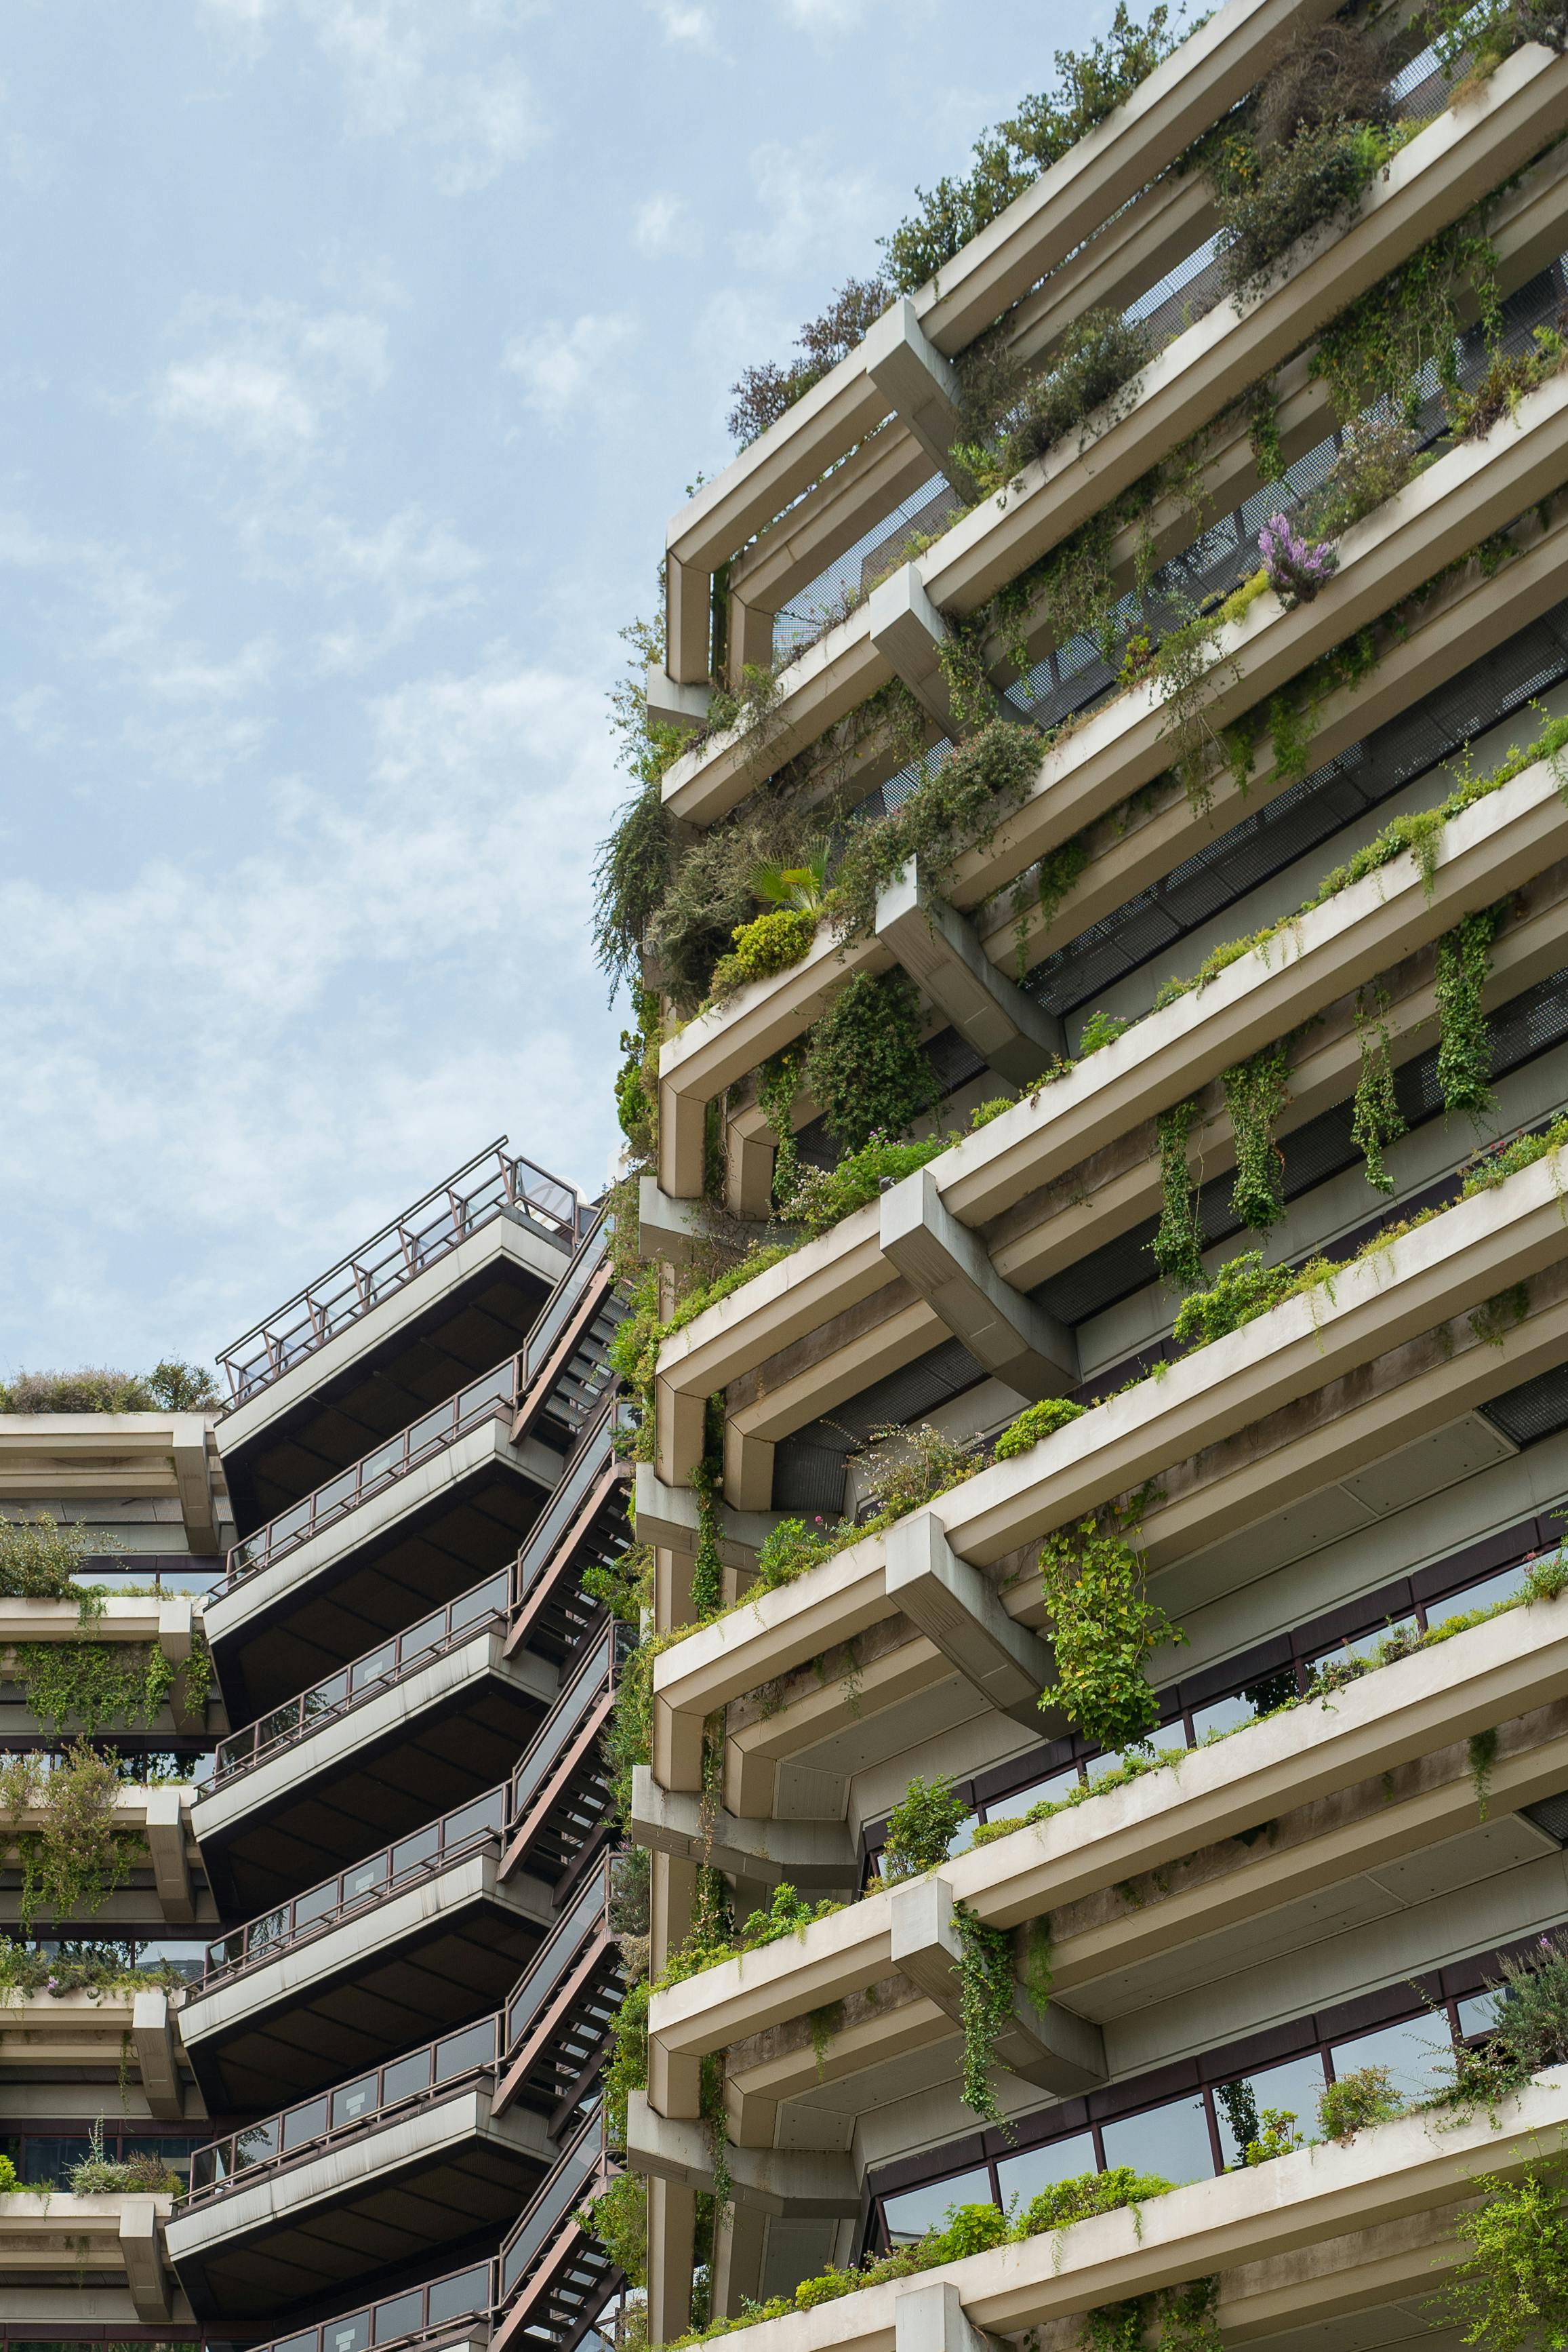 The exterior of a modern residential building in Barcelona, with concrete balconies overflowing with vibrant green plants.